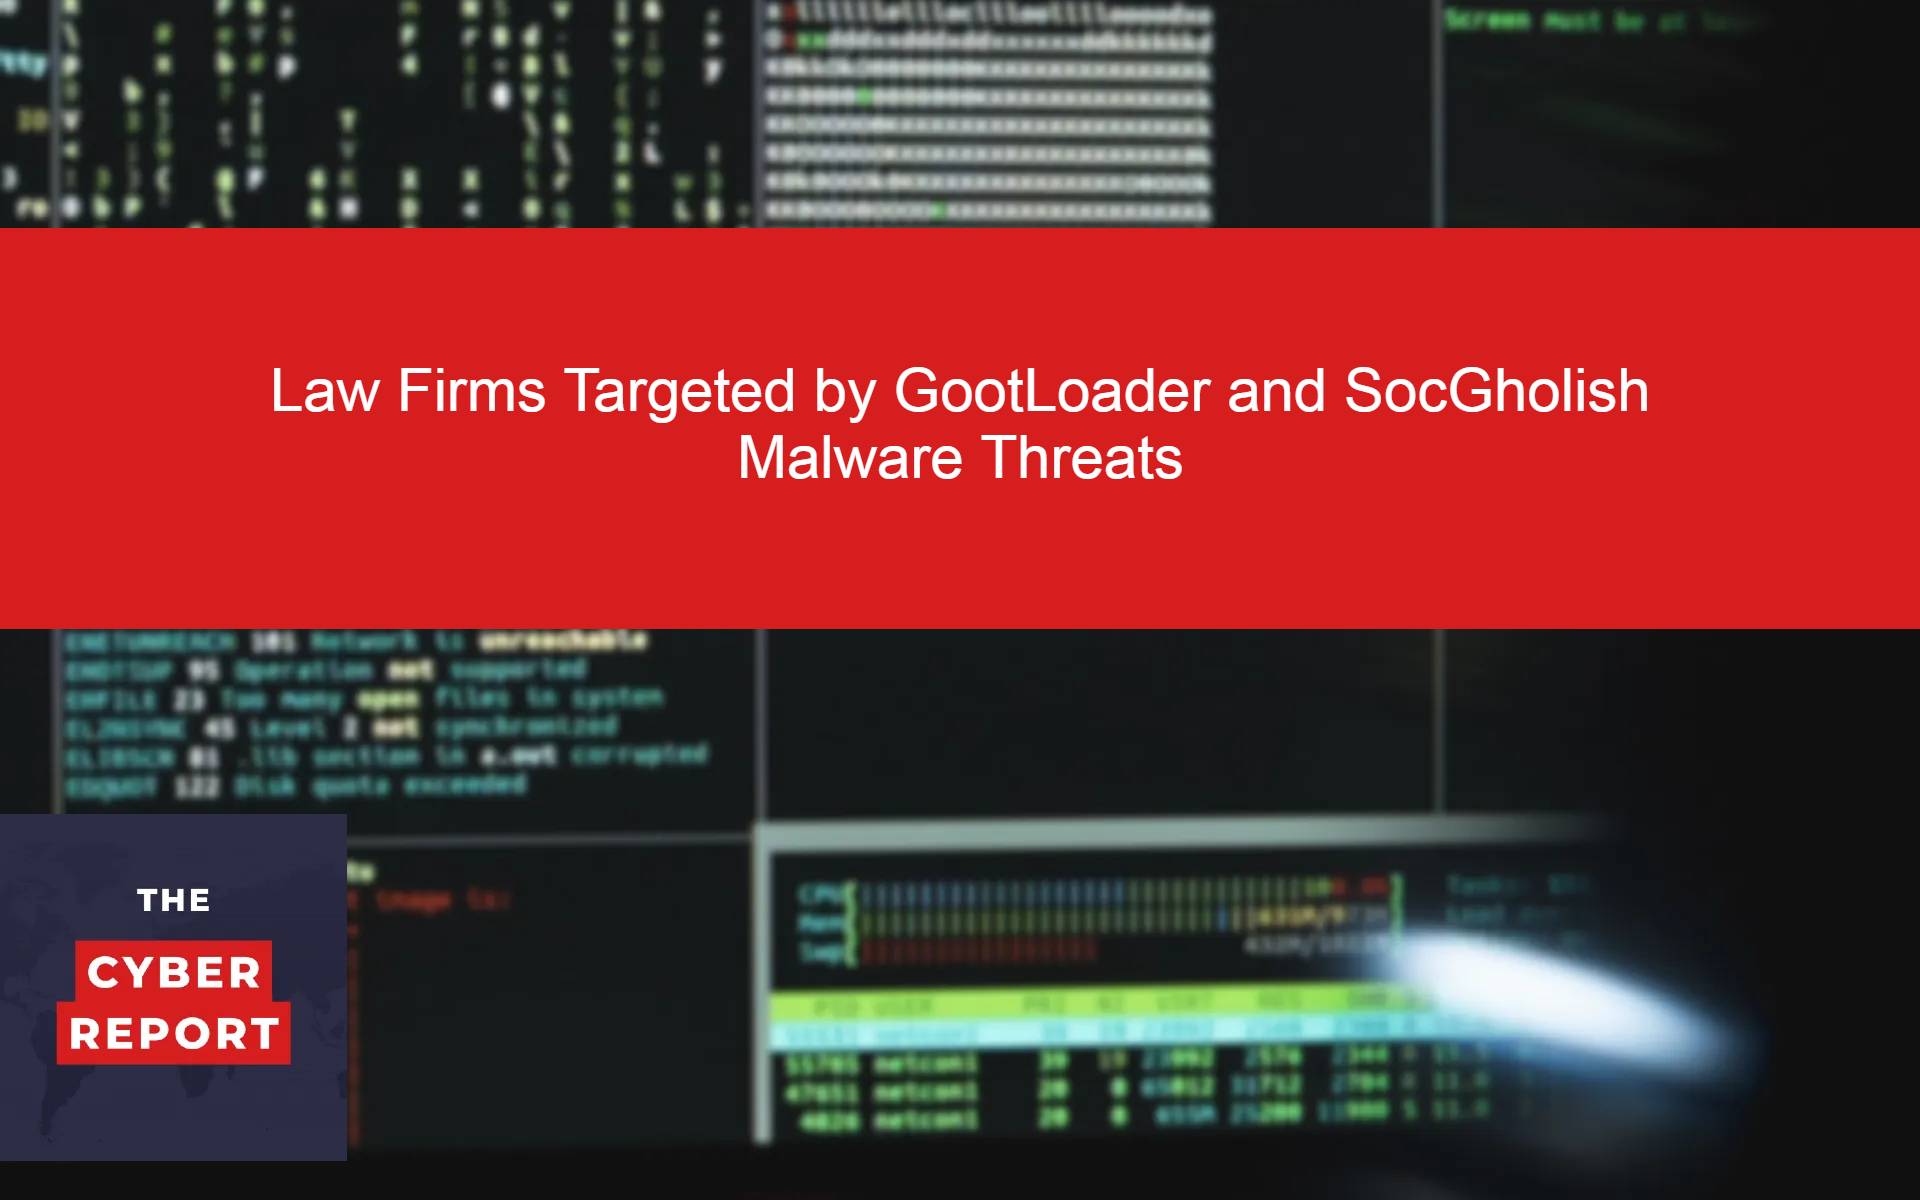 Law Firms Targeted by GootLoader and SocGholish Malware Threats